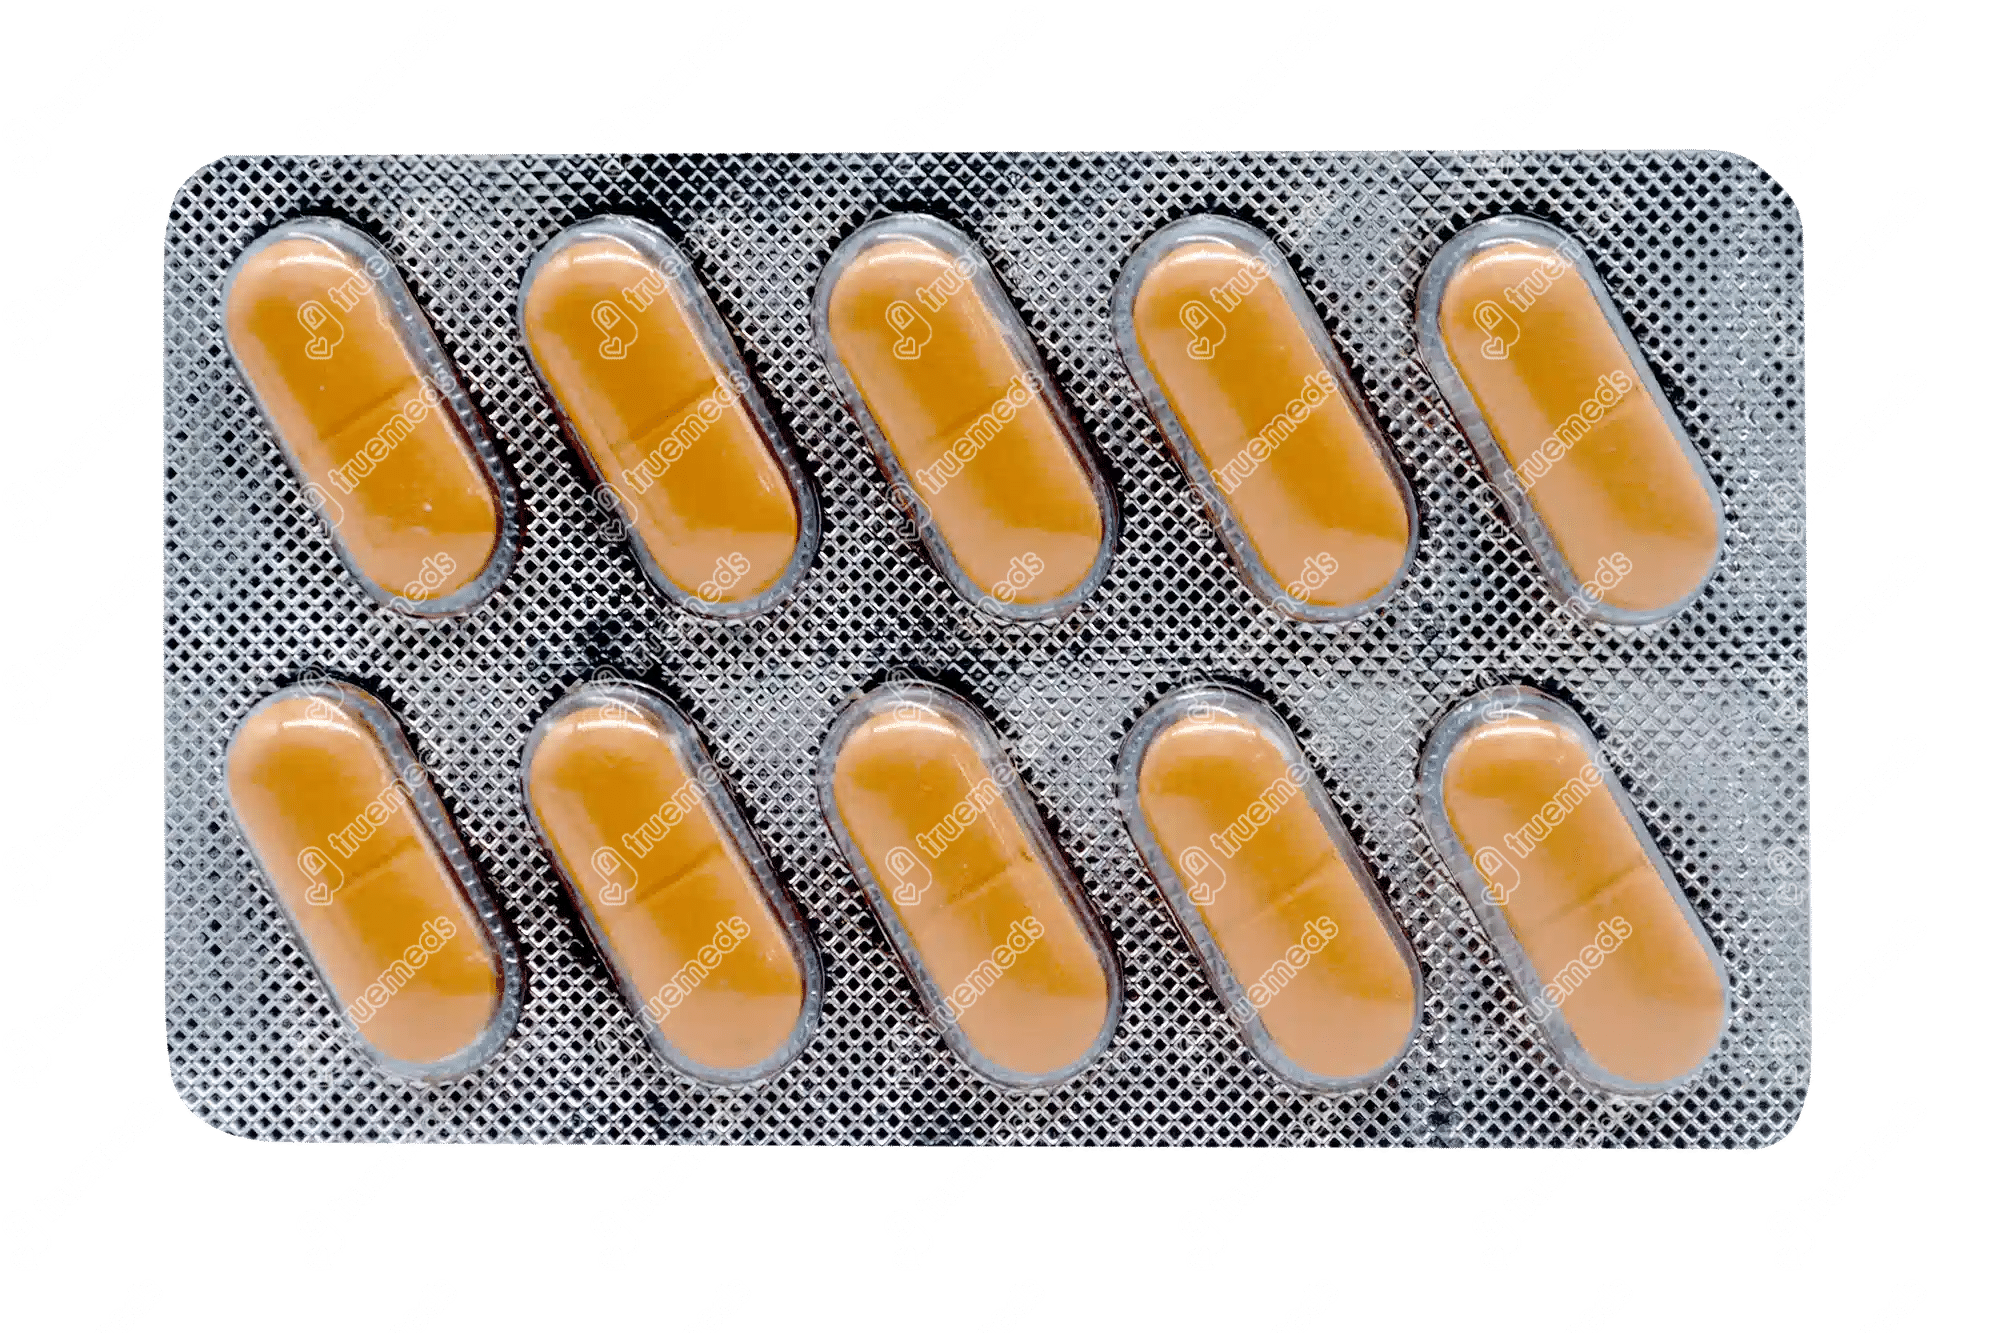 Daflon 1000 mg Tablet: Uses, Side Effects, Price and Dosage - osudpotro